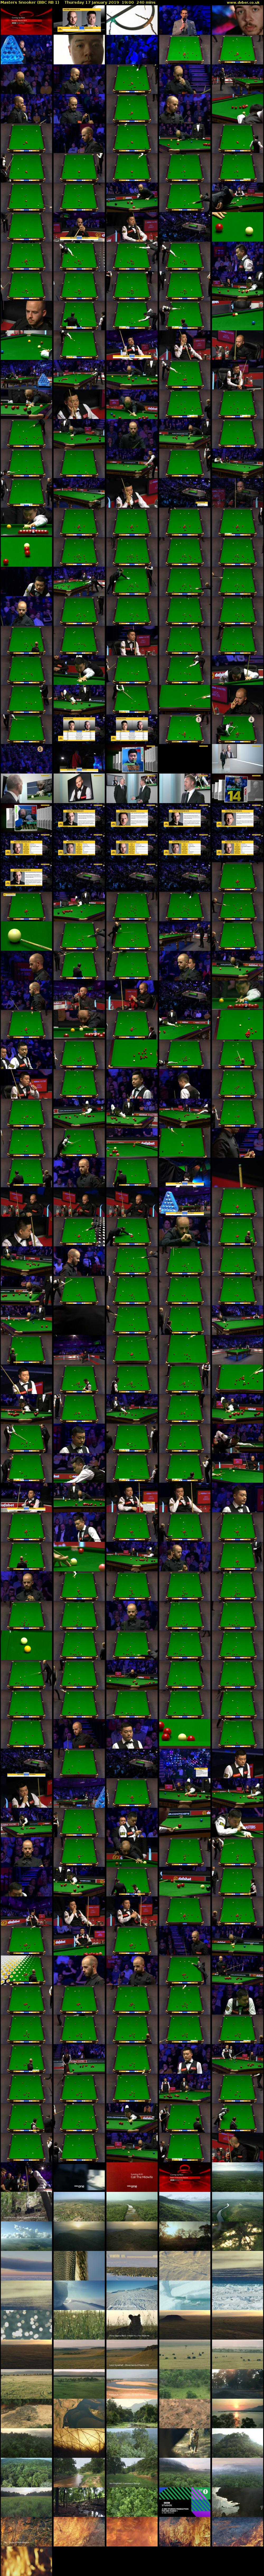 Masters Snooker (BBC RB 1) Thursday 17 January 2019 19:00 - 23:00